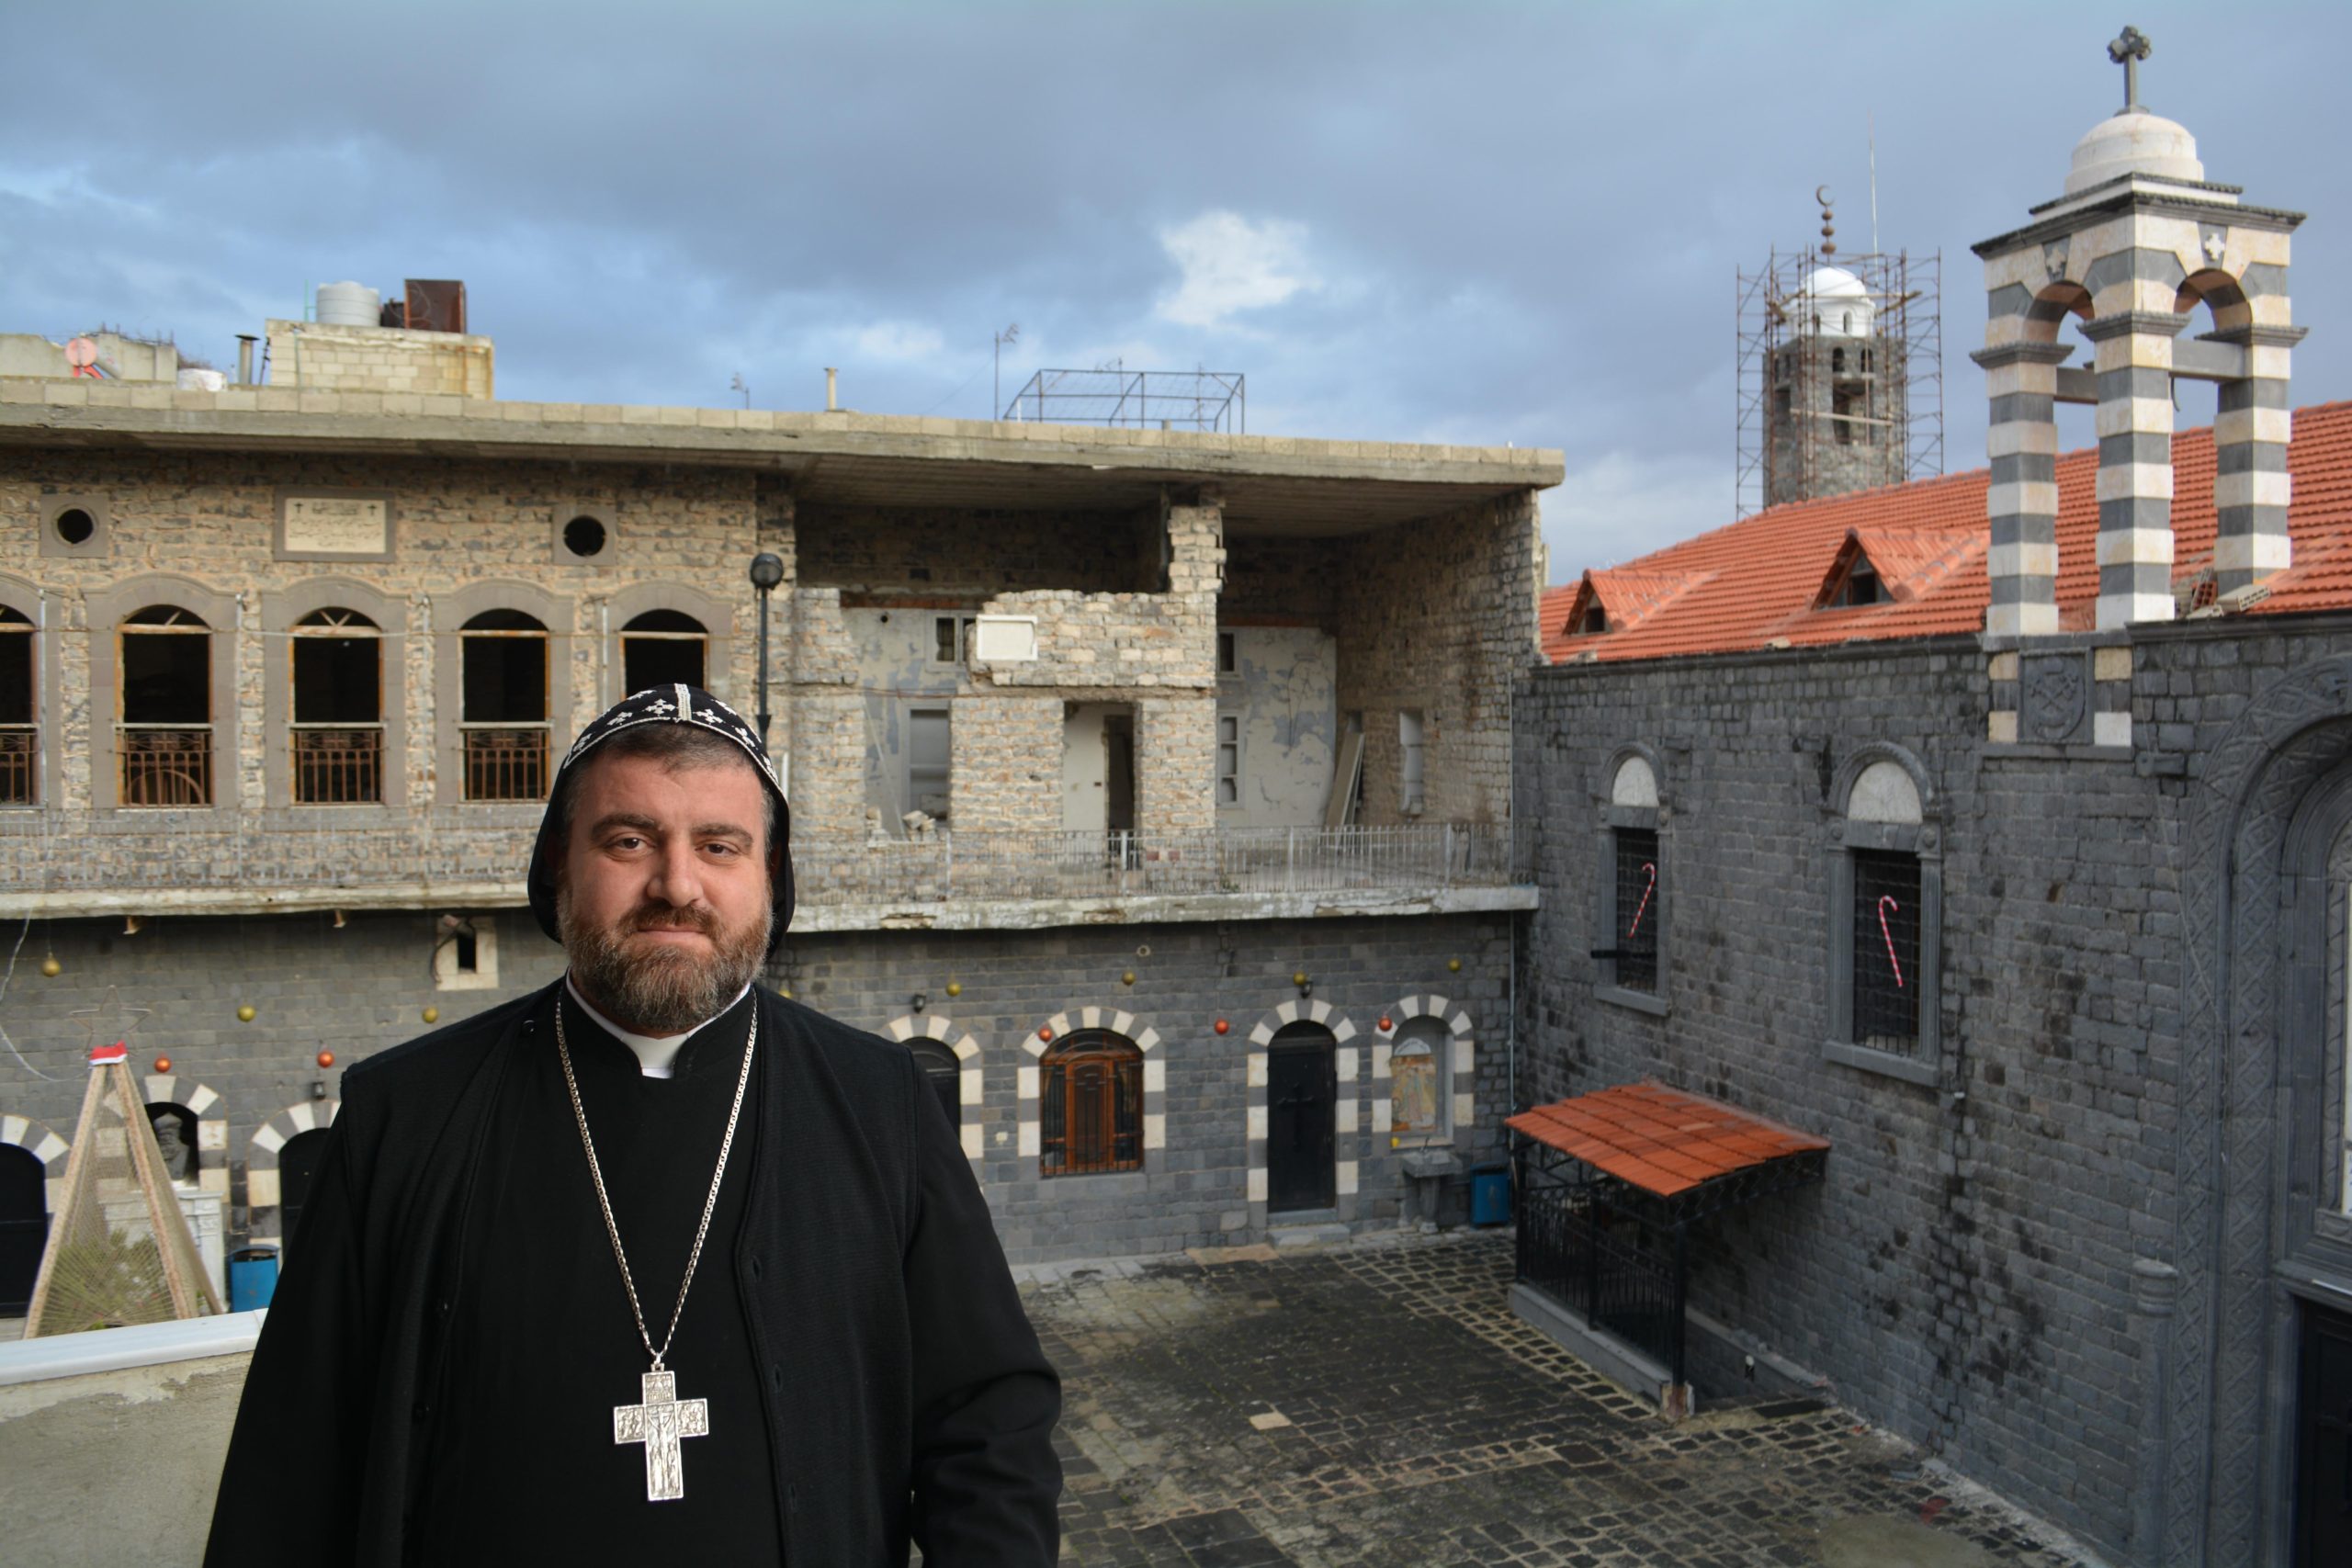 Syriac Orthodox Archbishop Selwanos Petros Al-Nemeh of Homs and Hama, with Saint Mary Church of the Holy Belt in the background (© Aid to the Church in Need)